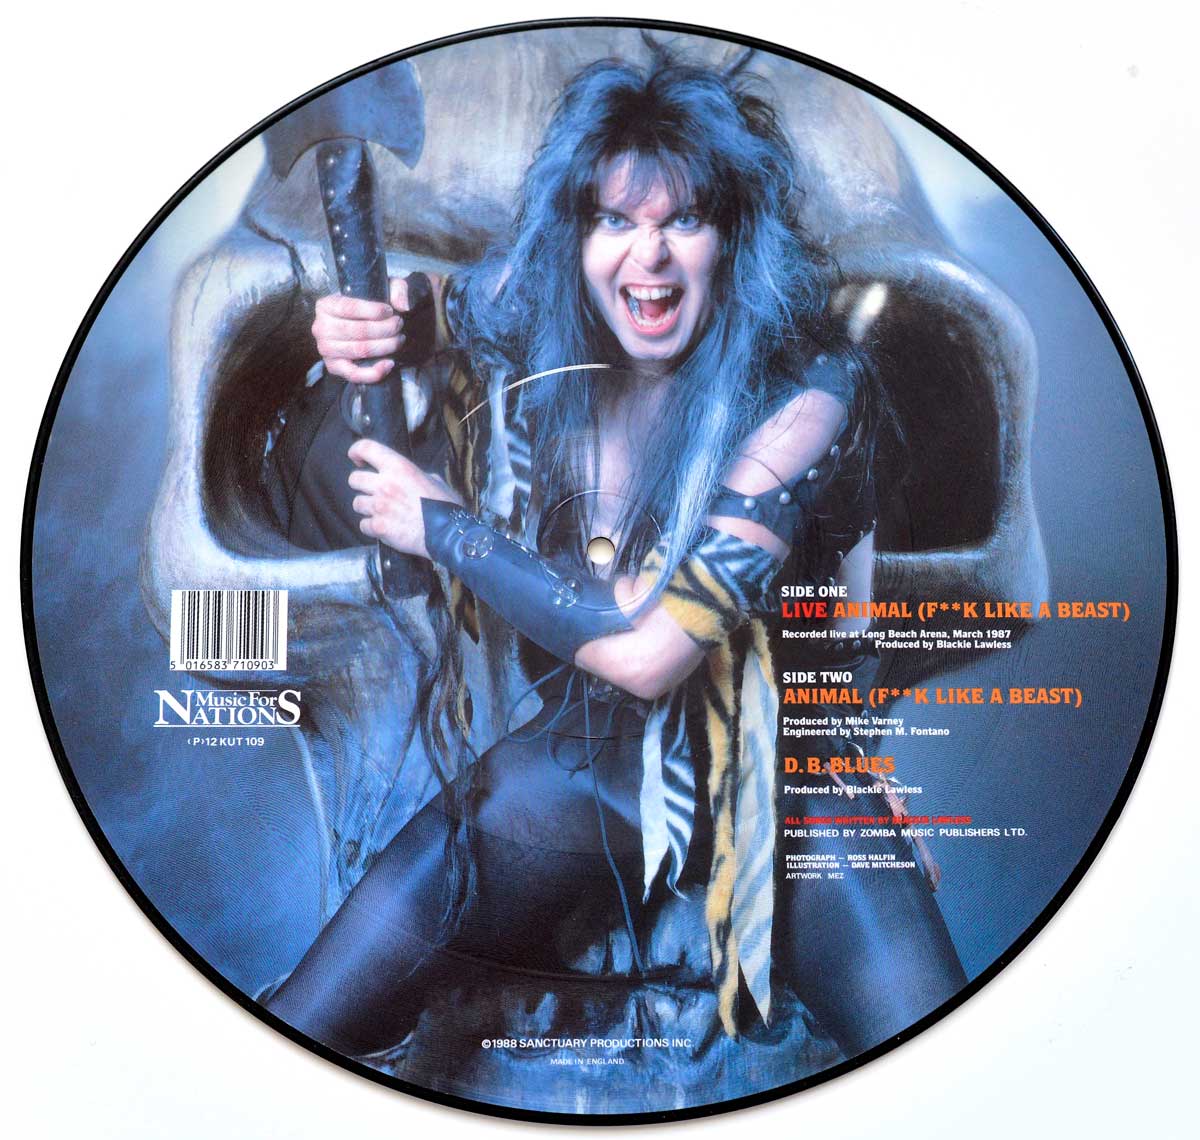 Photo of album back cover W.A.S.P. - LIVE ANIMAL F*CK LIKE A BEAST PD ( PICTURE DISC ) Limited Edition